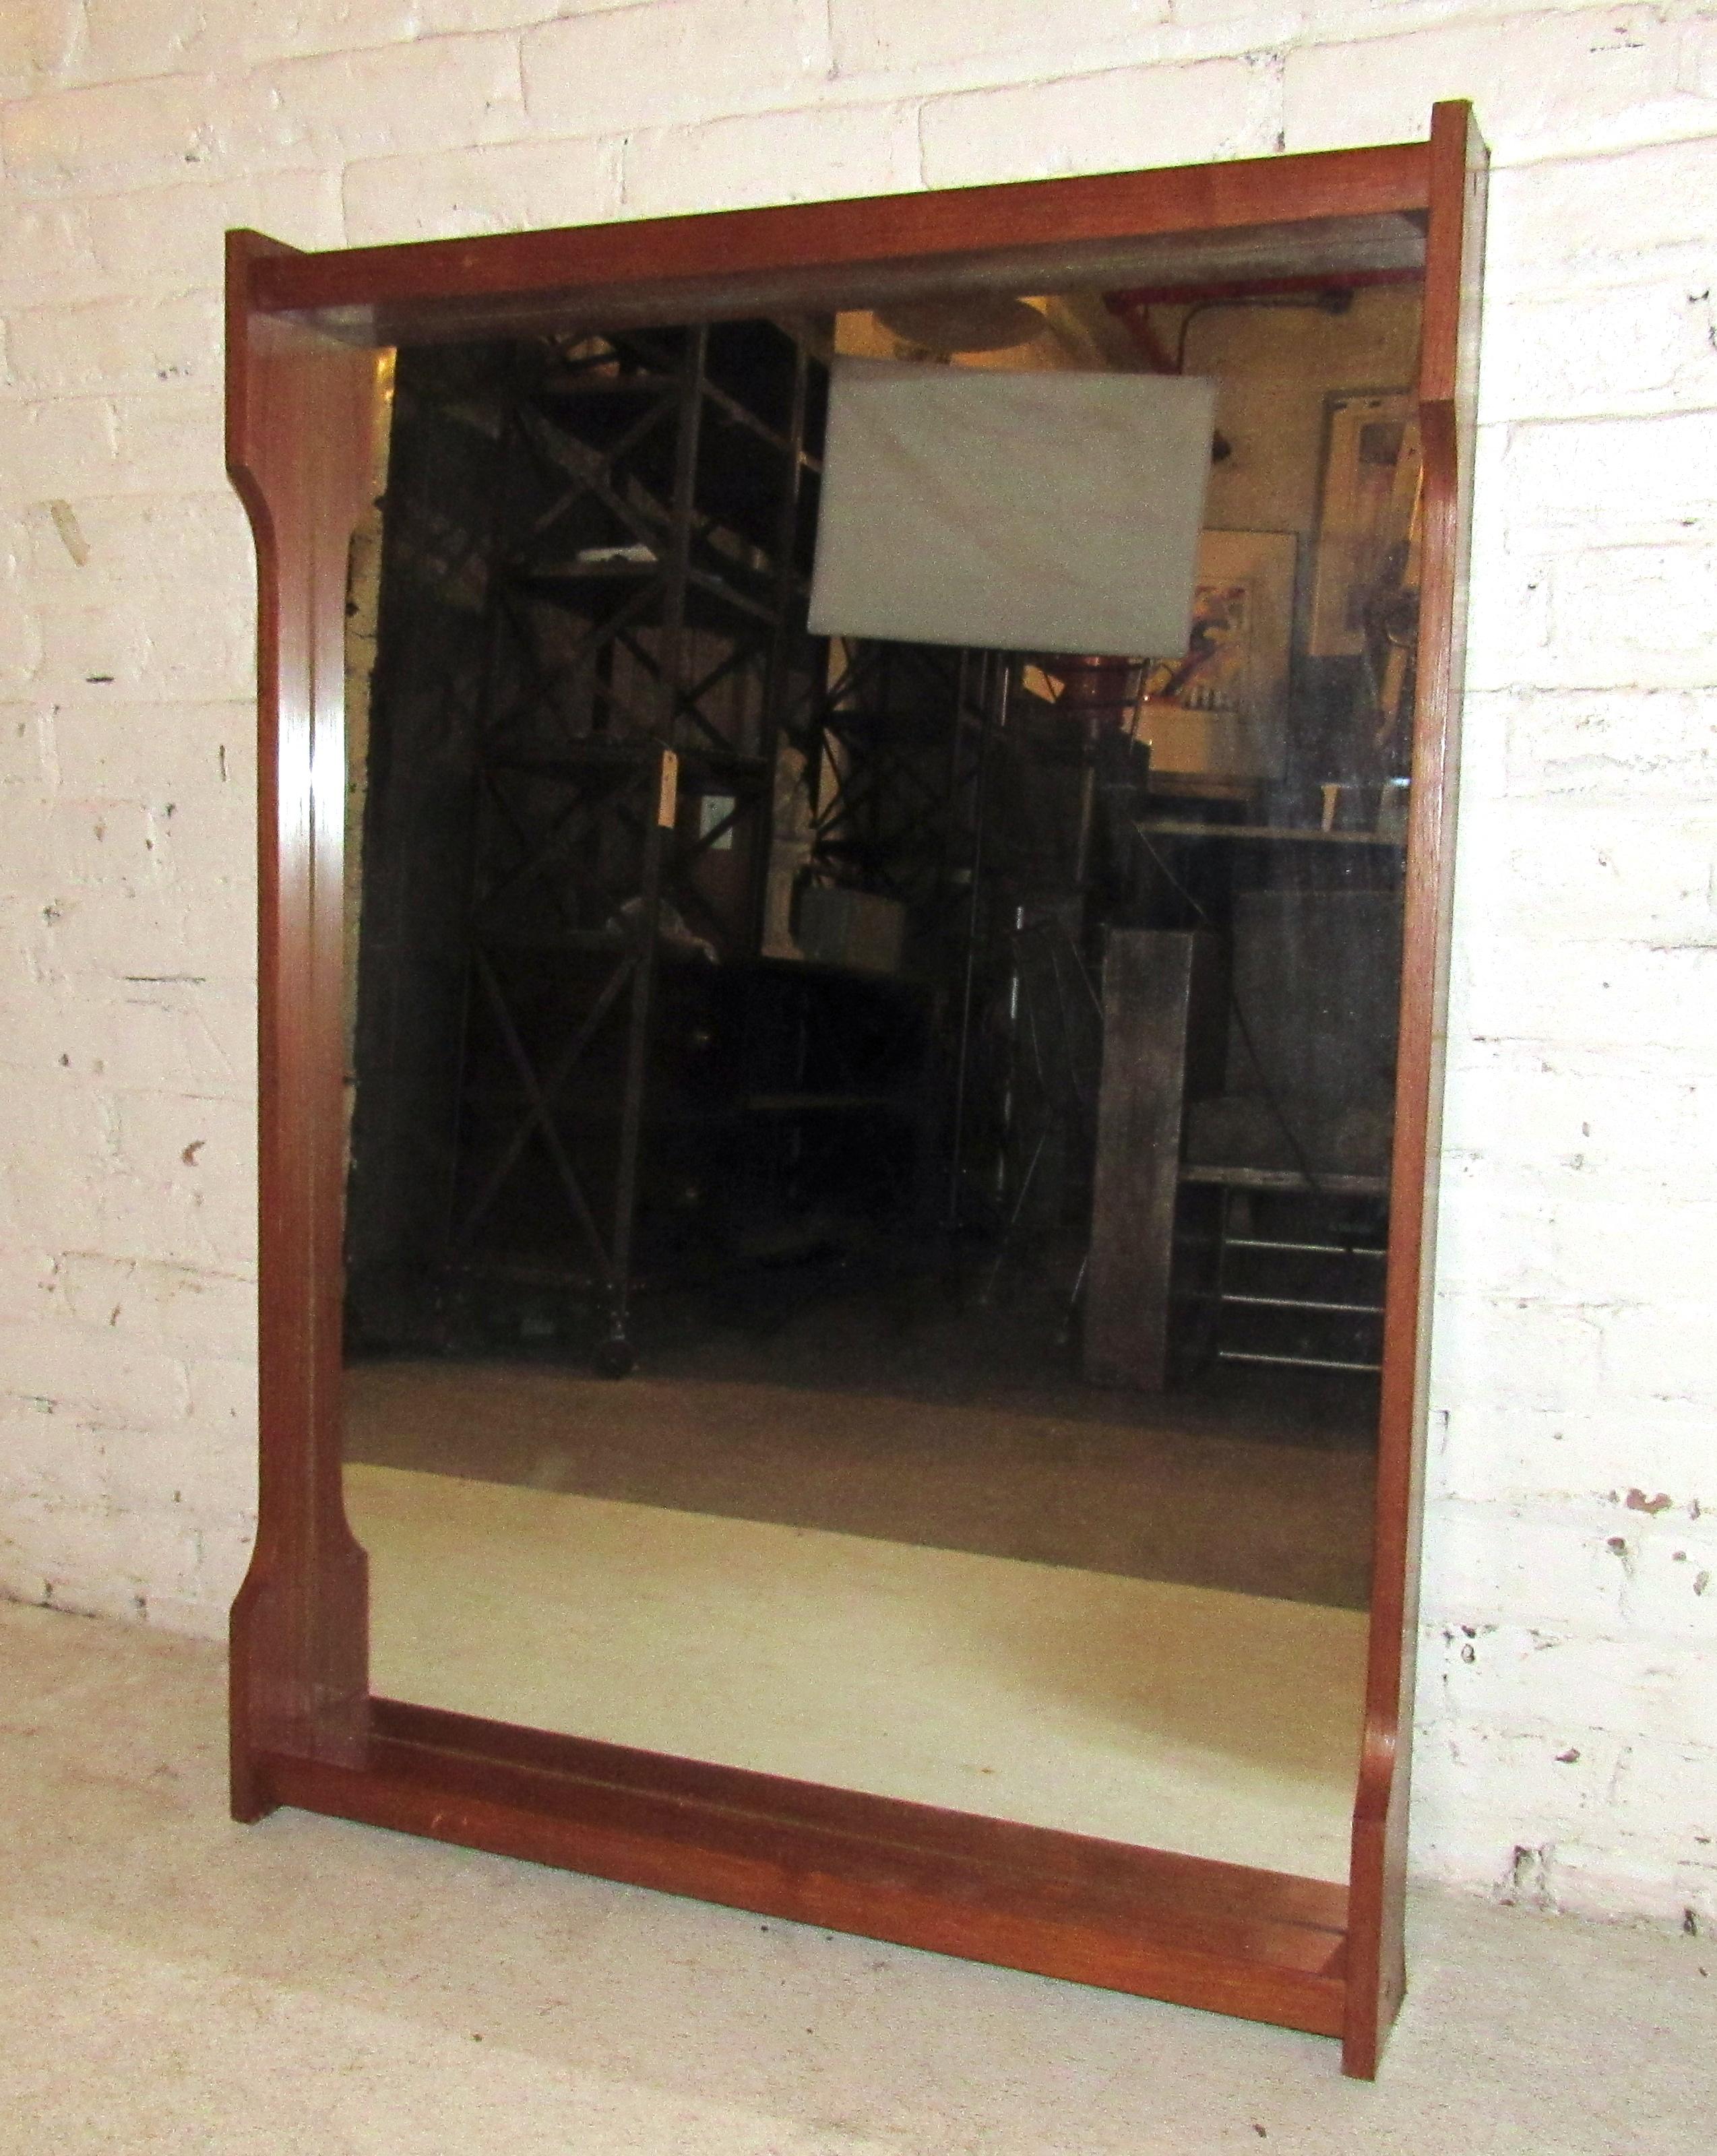 Sleek vintage modern wall mirror featuring a small shelf, stamped RS.

(Please confirm item location - NY or NJ - with dealer).